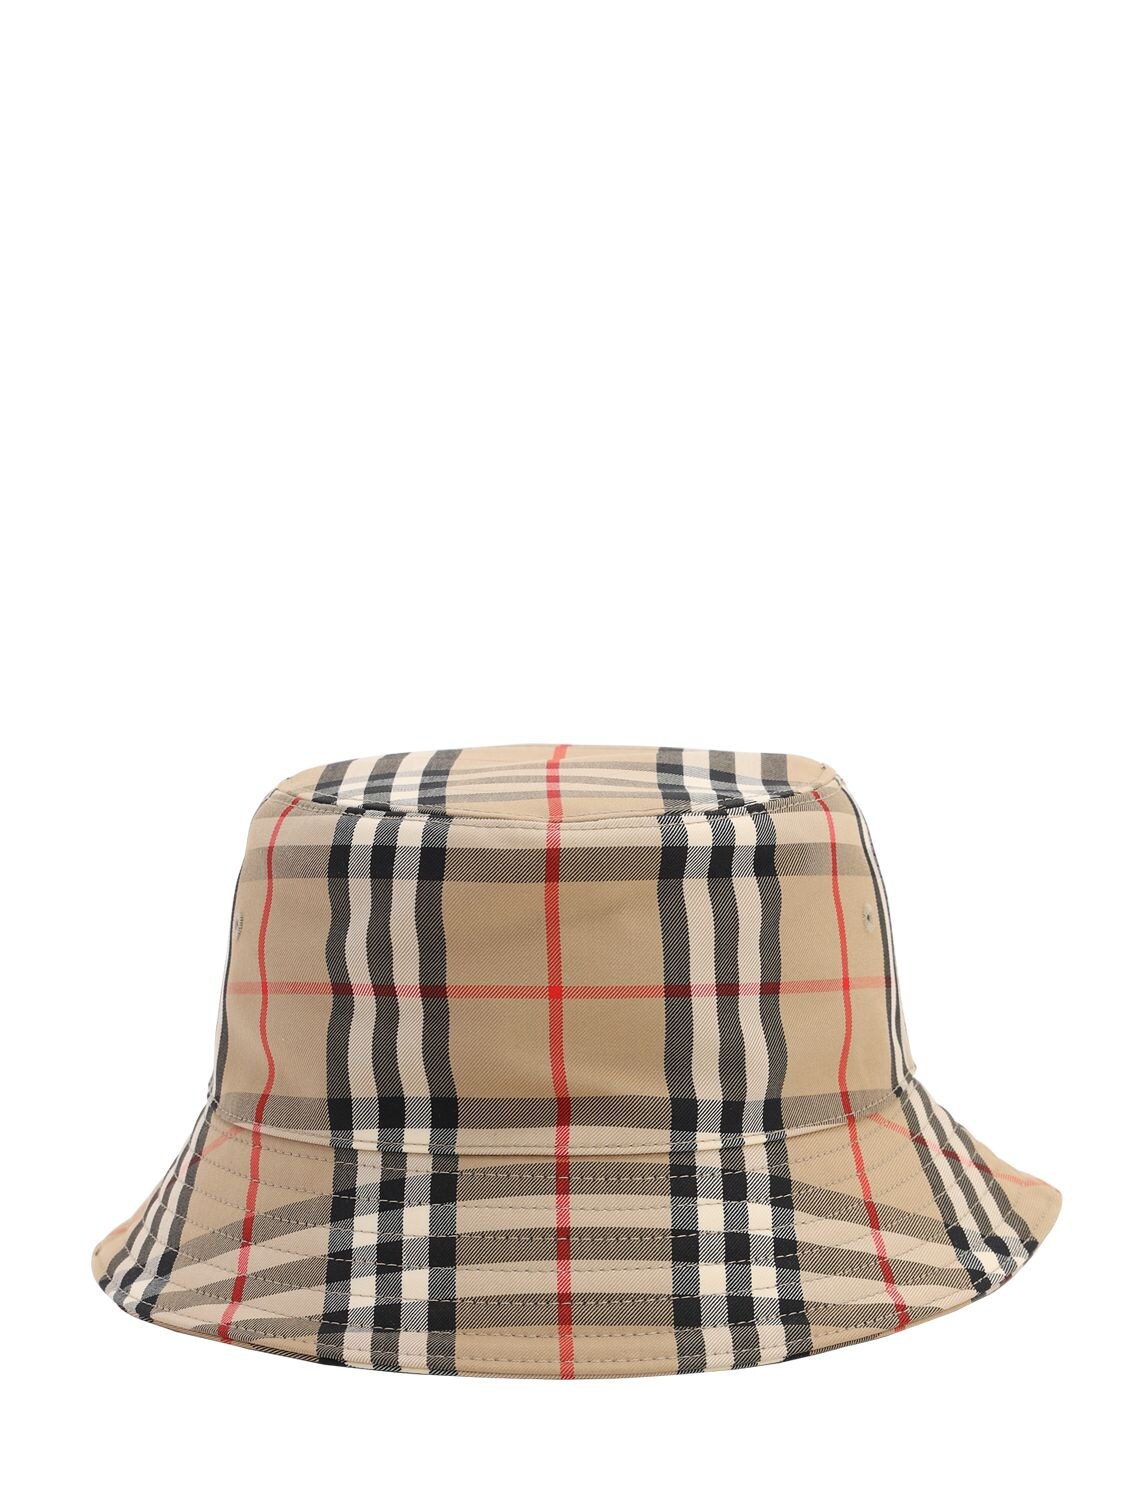 Burberry Vintage Check Print Bucket Hat In Archive Beige